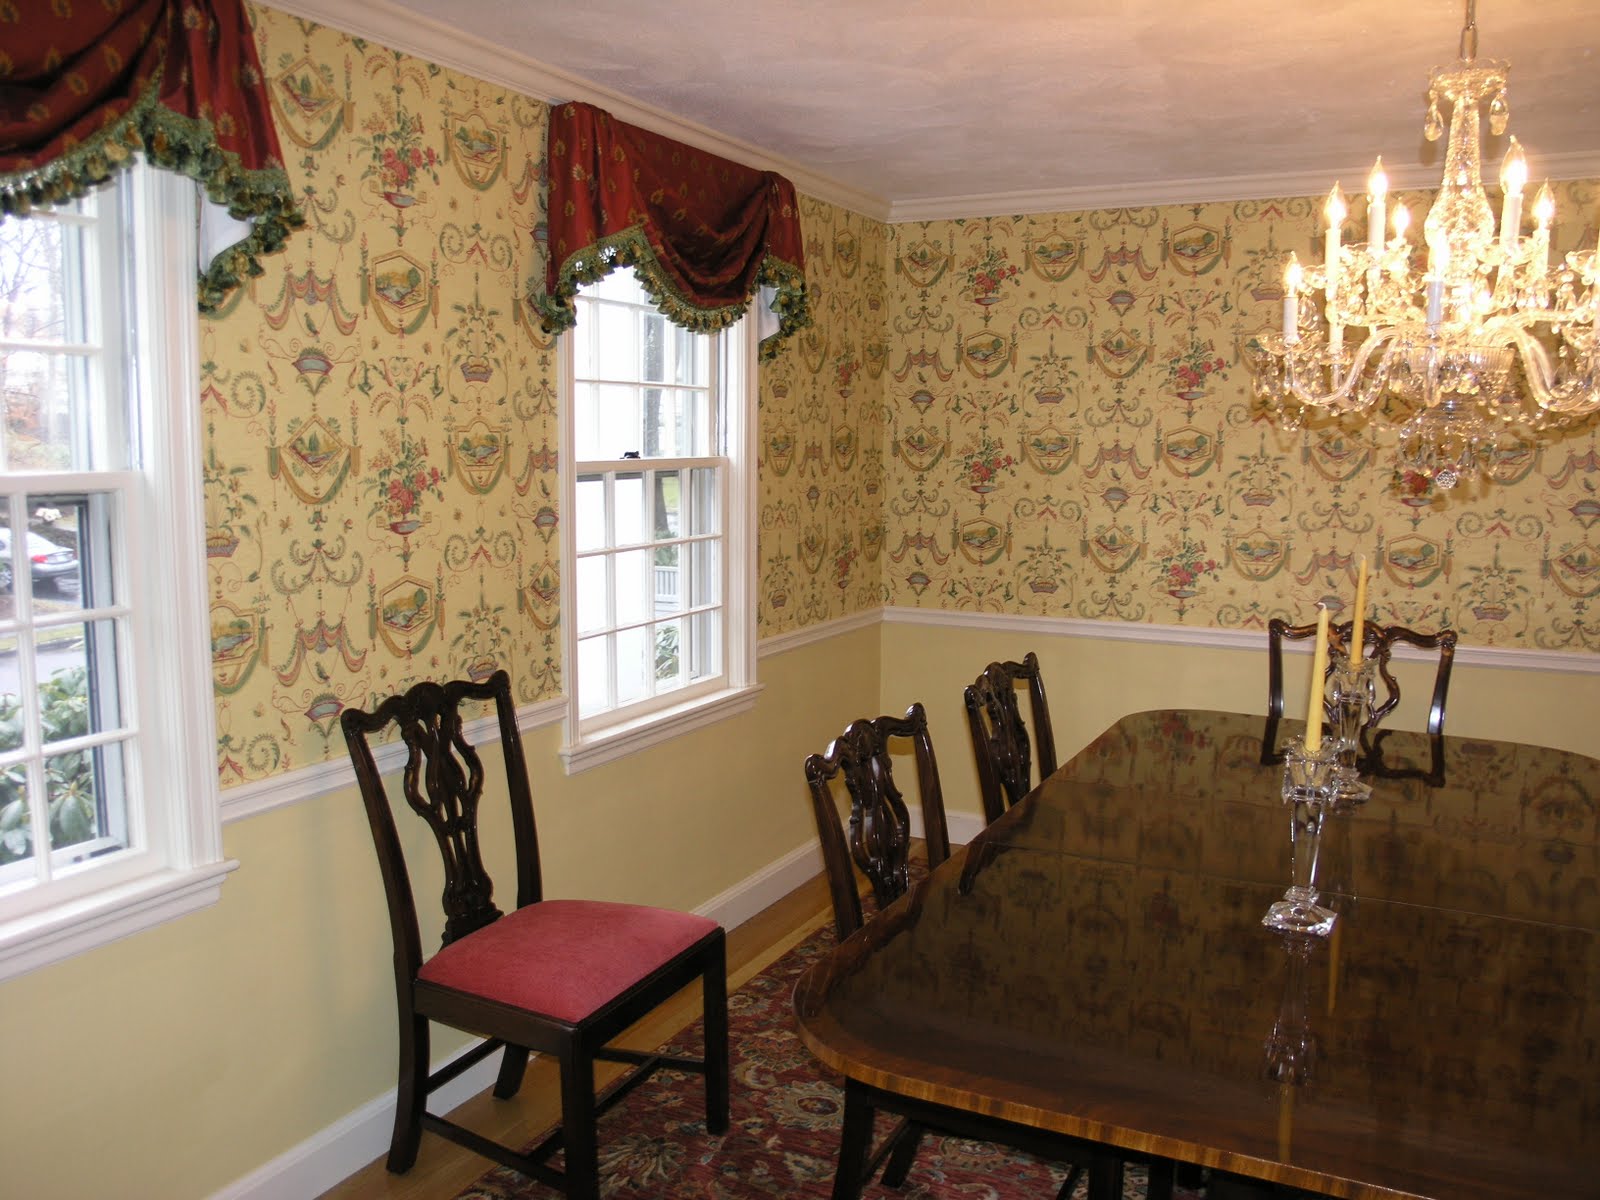 Greeff Historic Reproduction Wallpaper Colefax Fowler Silk With